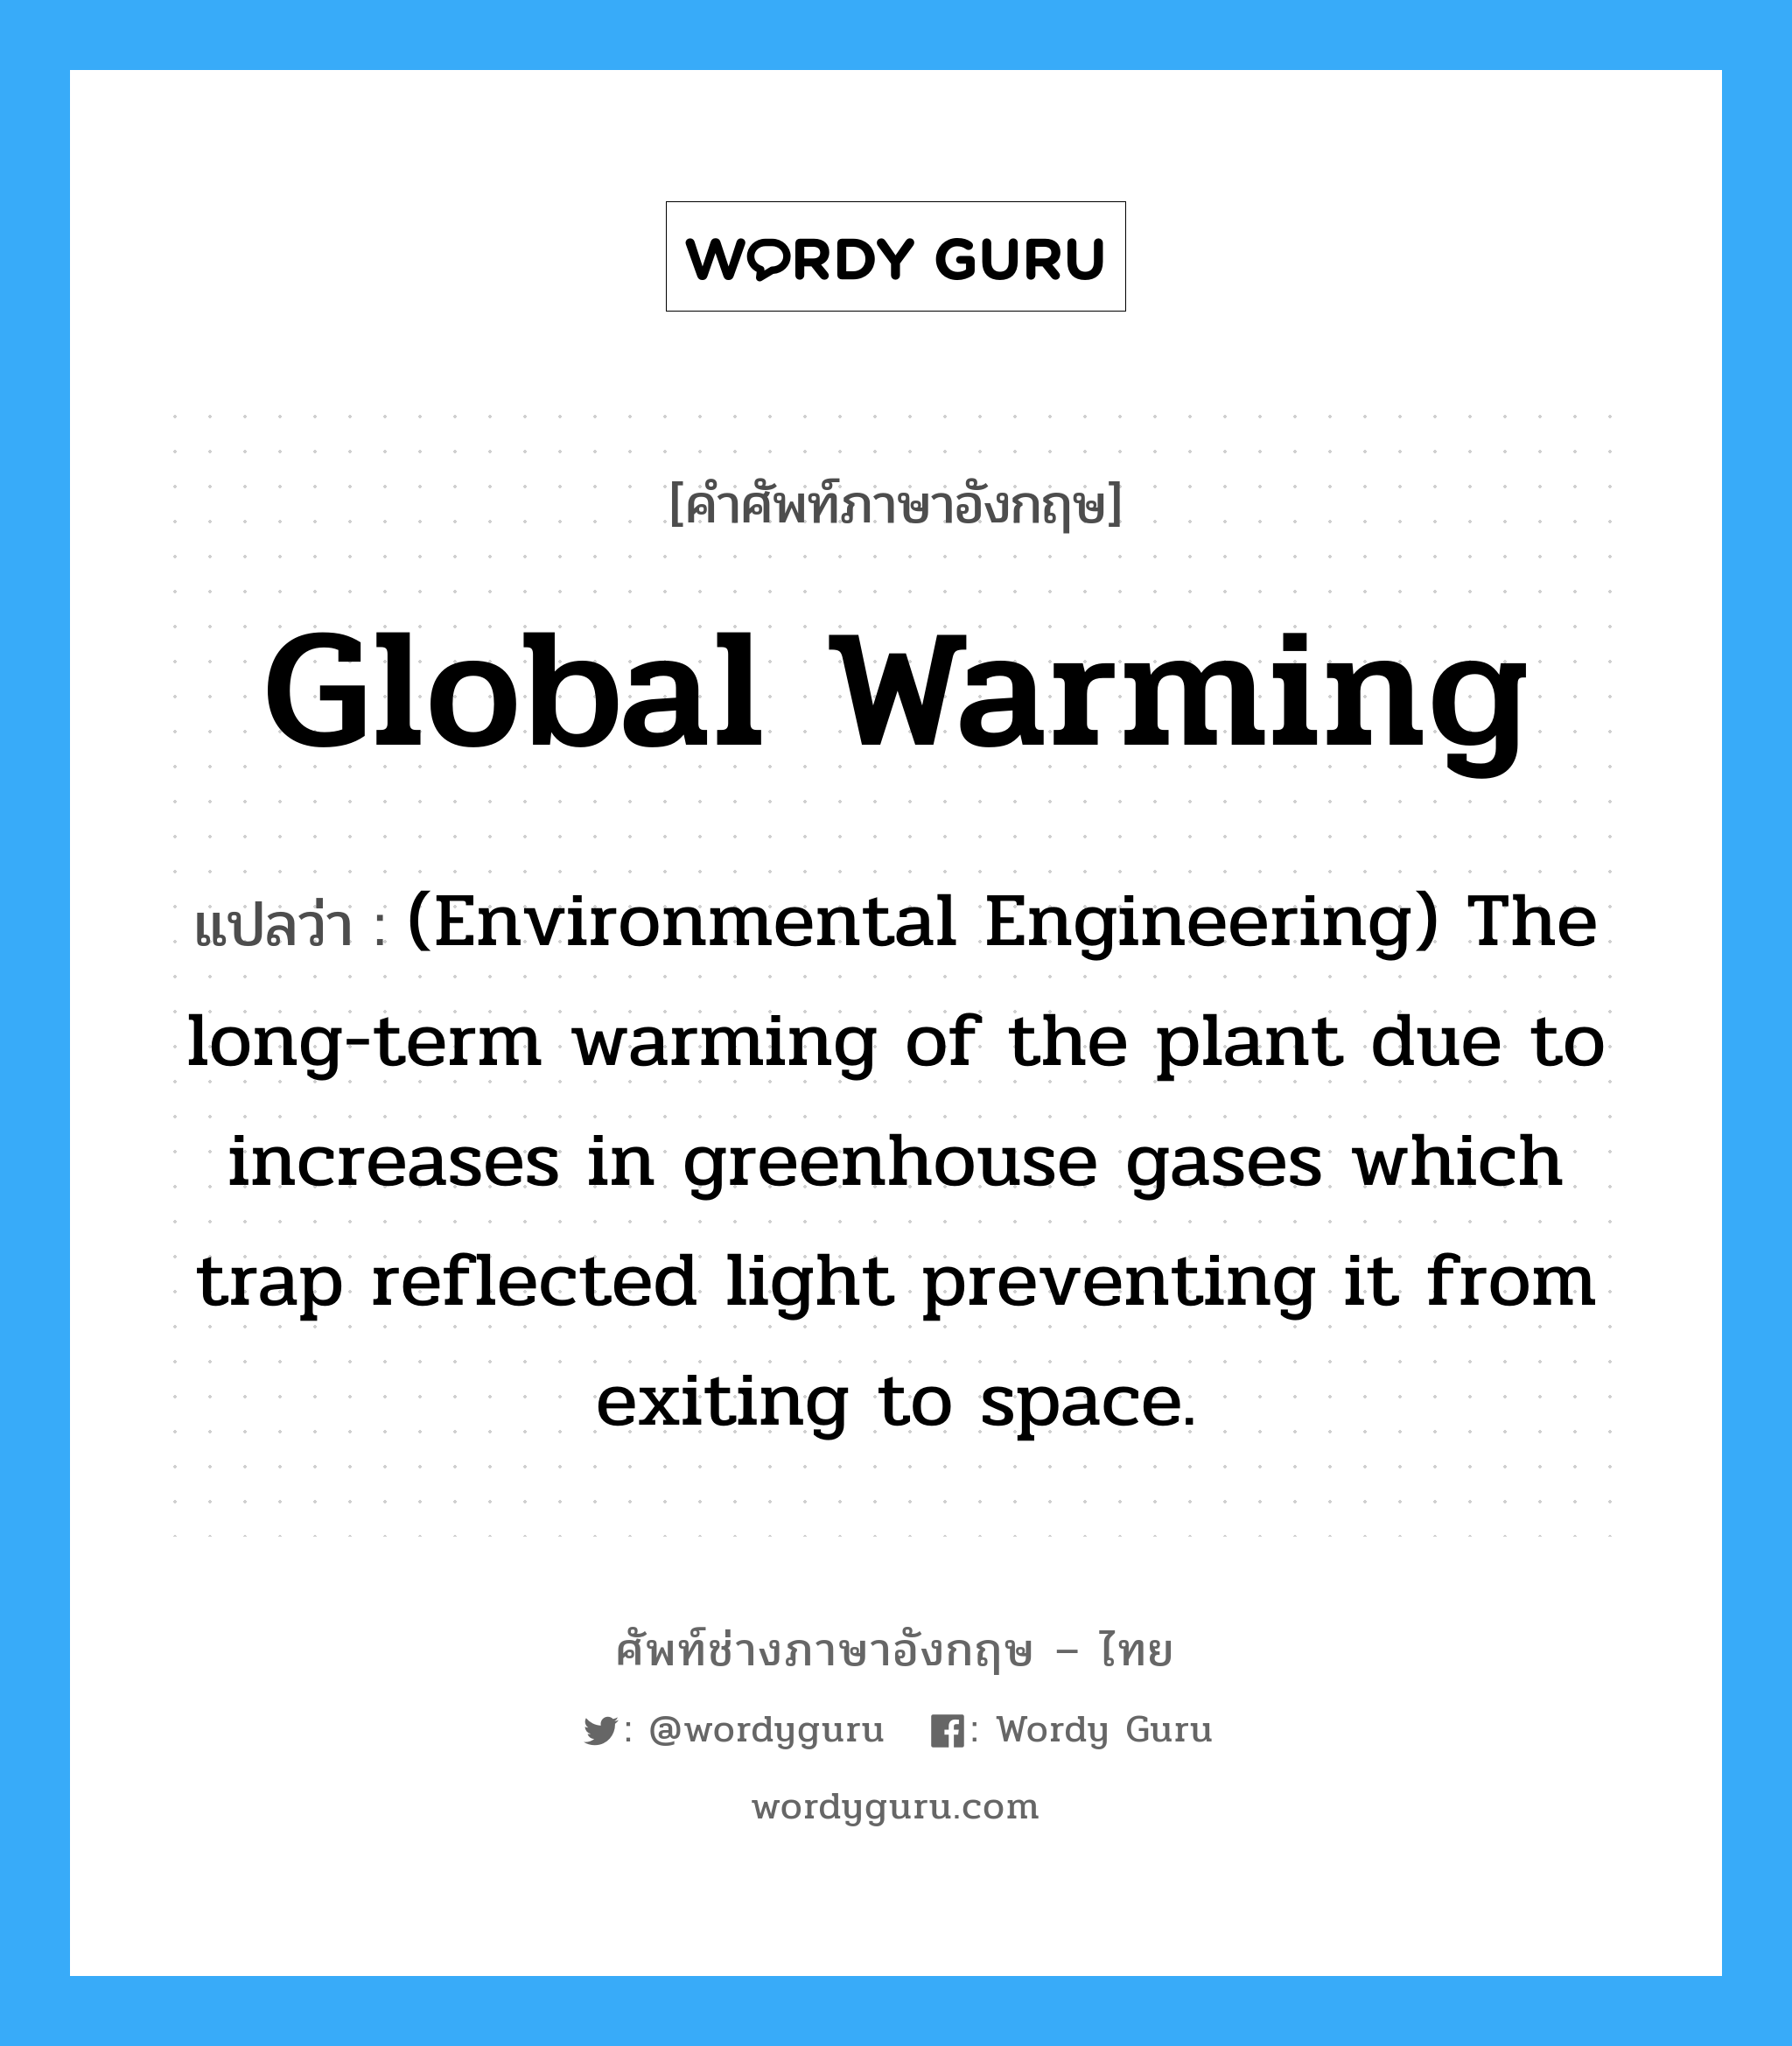 (Environmental Engineering) The long-term warming of the plant due to increases in greenhouse gases which trap reflected light preventing it from exiting to space. ภาษาอังกฤษ?, คำศัพท์ช่างภาษาอังกฤษ - ไทย (Environmental Engineering) The long-term warming of the plant due to increases in greenhouse gases which trap reflected light preventing it from exiting to space. คำศัพท์ภาษาอังกฤษ (Environmental Engineering) The long-term warming of the plant due to increases in greenhouse gases which trap reflected light preventing it from exiting to space. แปลว่า Global warming